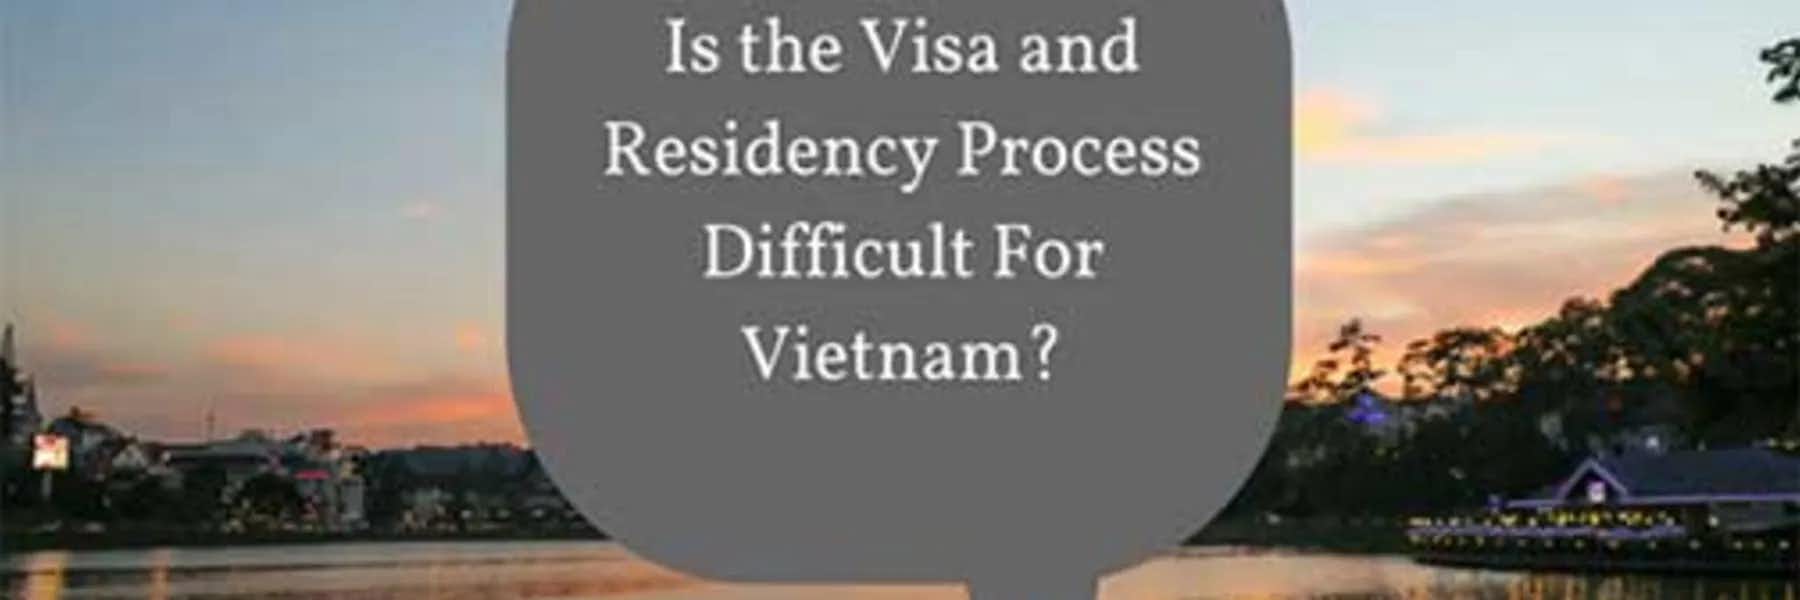 Is the Visa and Residency Process Difficult For Vietnam?